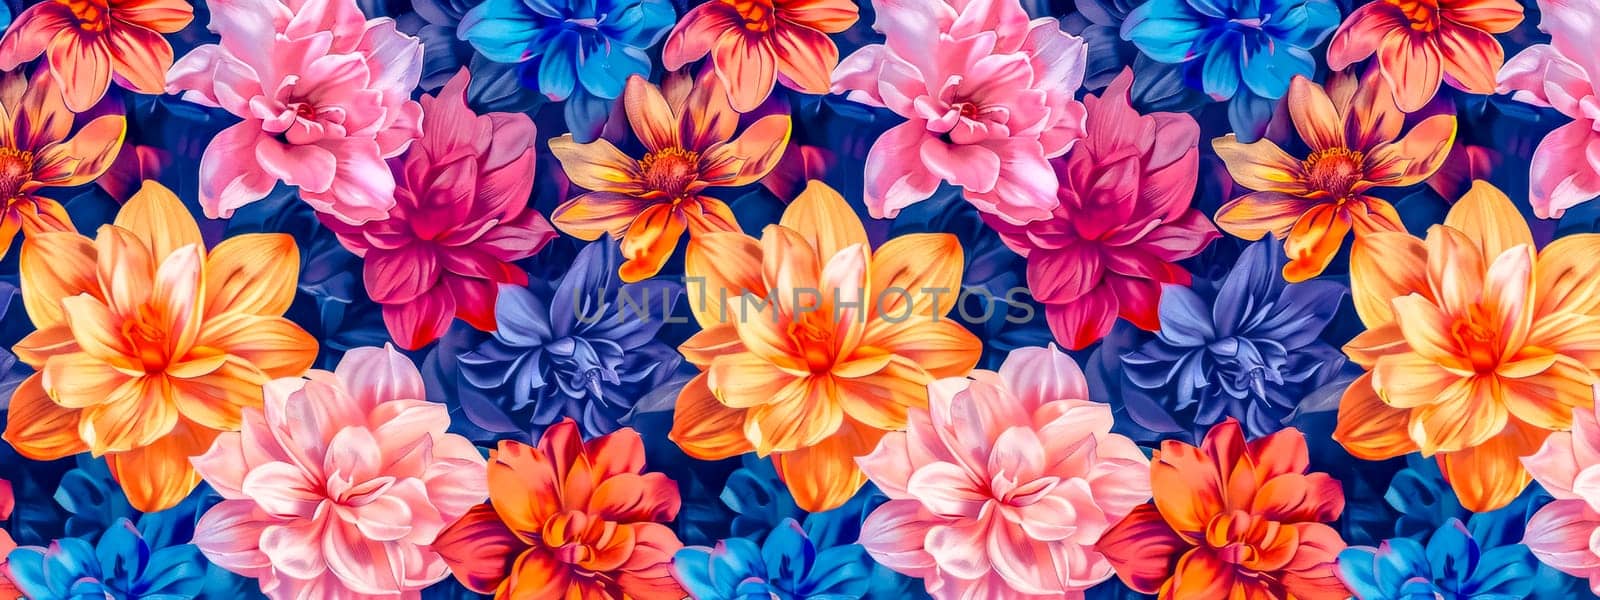 Vibrant and colorful seamless pattern of assorted flowers in full bloom by Edophoto